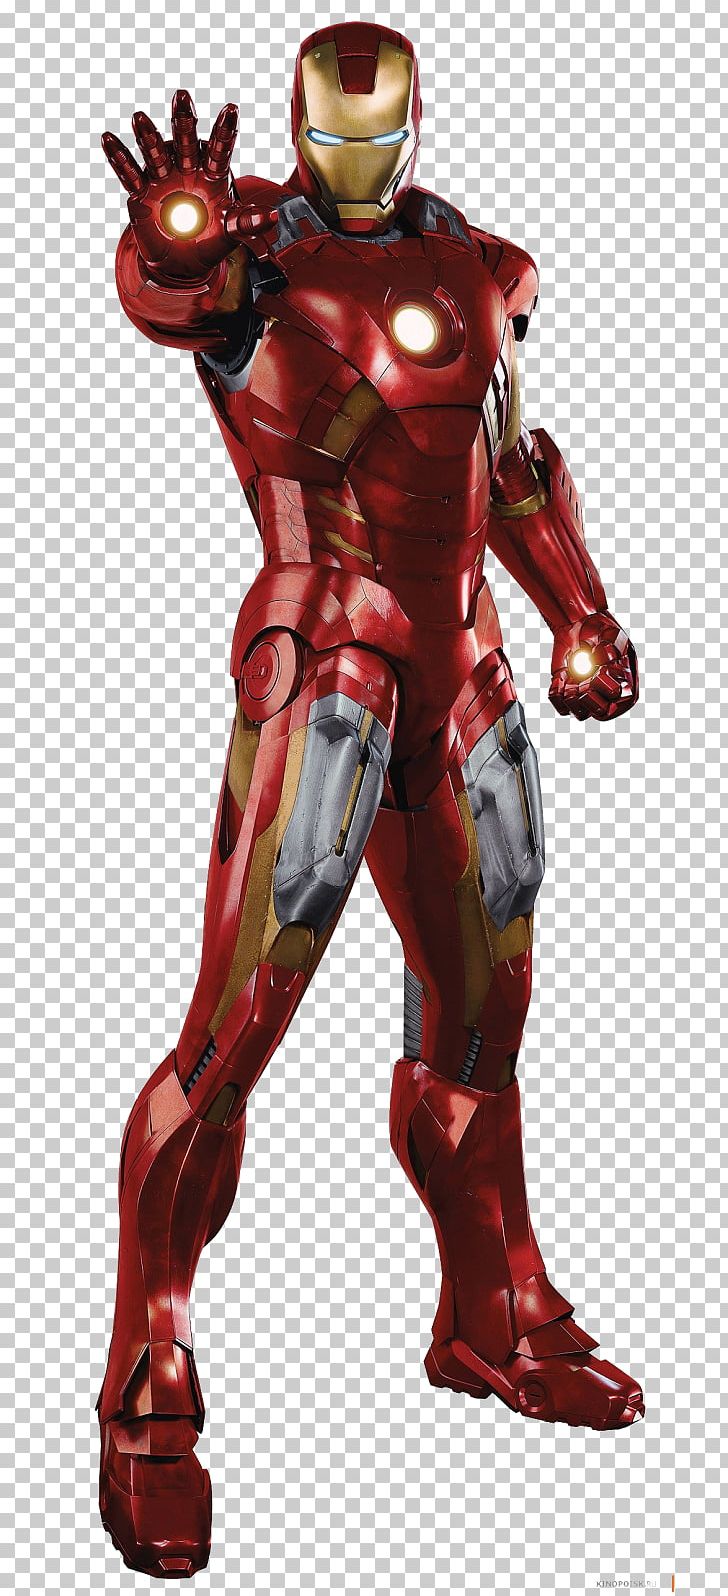 Iron Man's Armor Edwin Jarvis Captain America Marvel Cinematic Universe PNG, Clipart, Avengers, Captain America, Comic, Desktop Wallpaper, Edwin Jarvis Free PNG Download